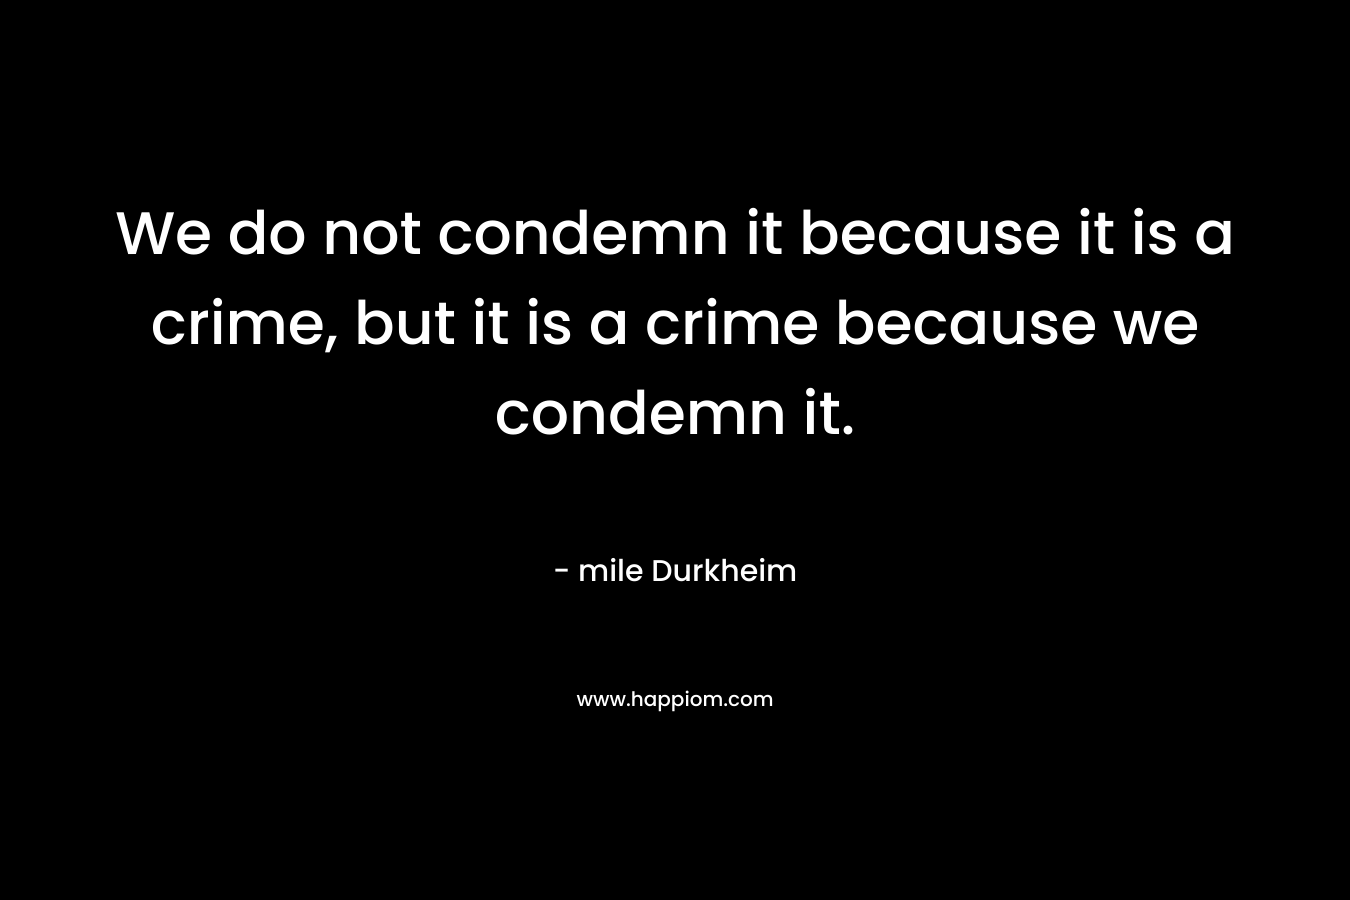 We do not condemn it because it is a crime, but it is a crime because we condemn it.